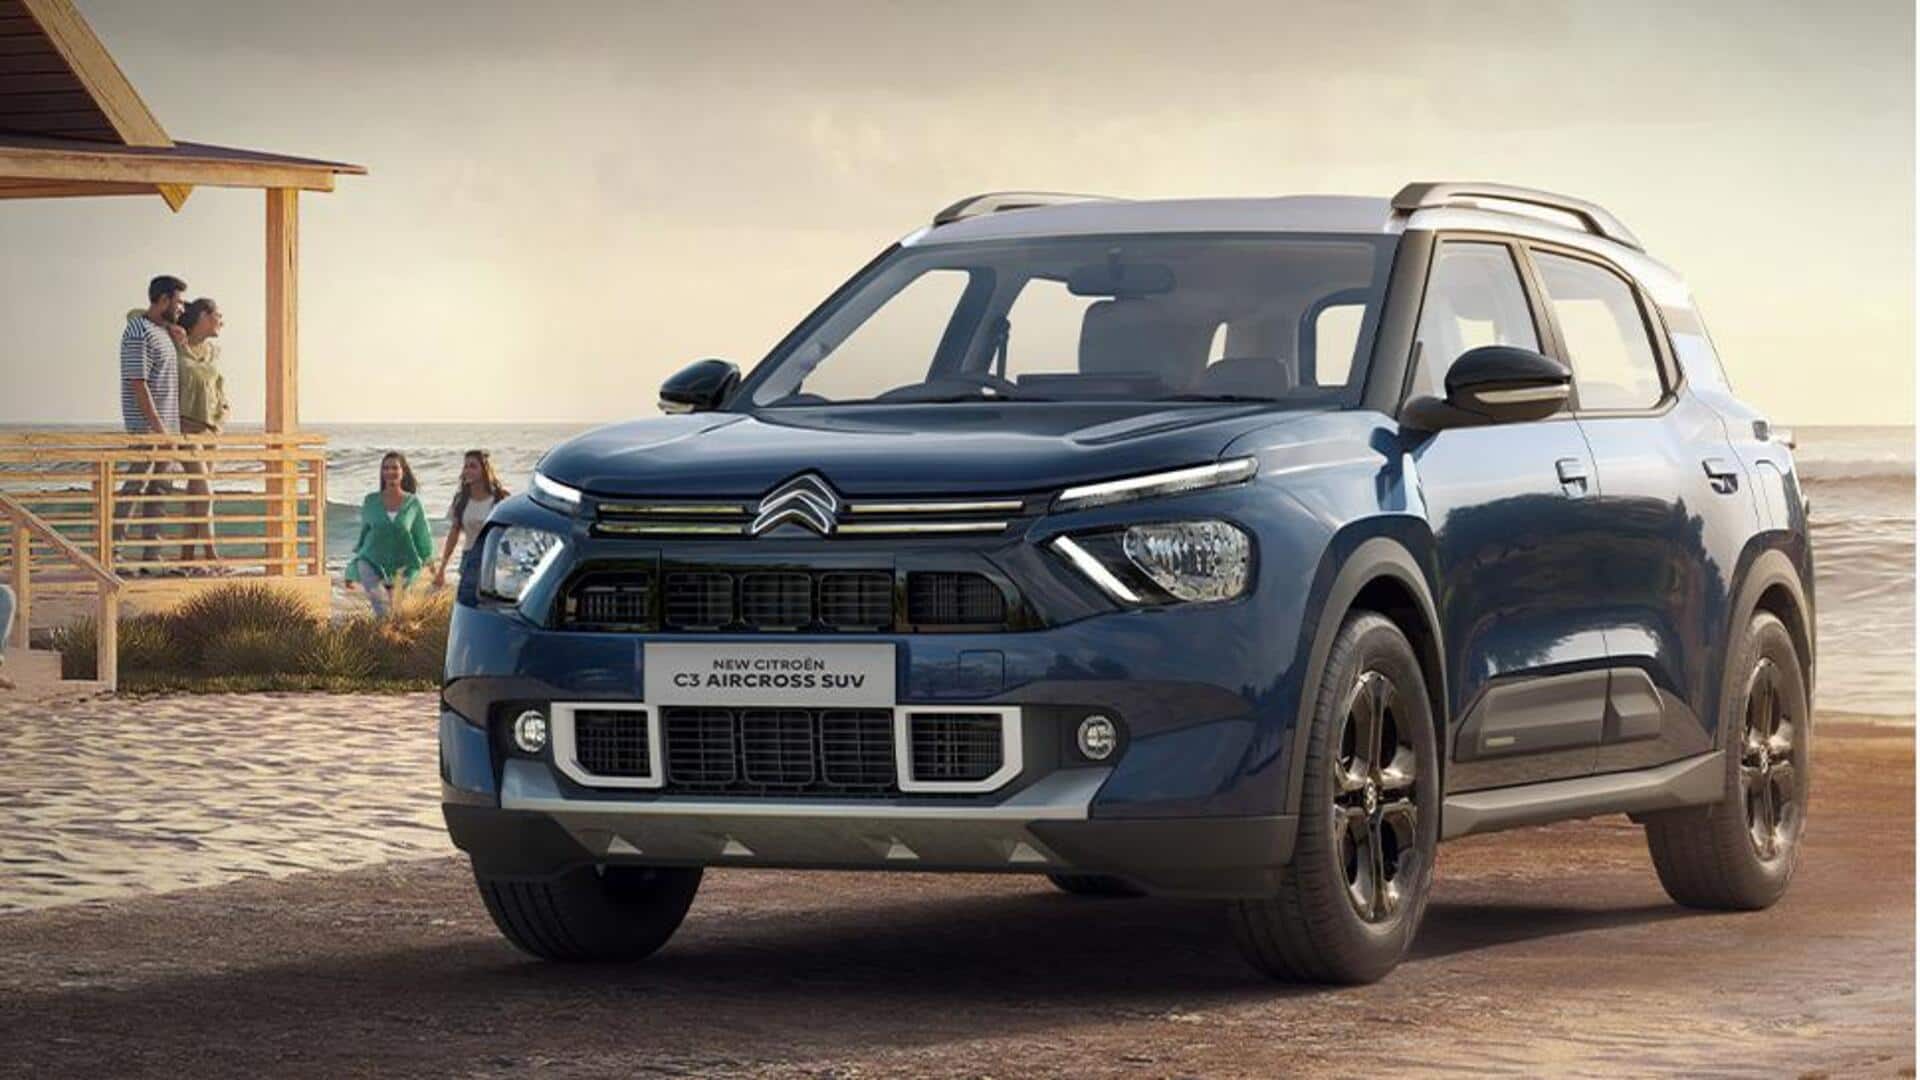 Citroen offering benefits worth Rs. 1.5L on C3, C3 Aircross